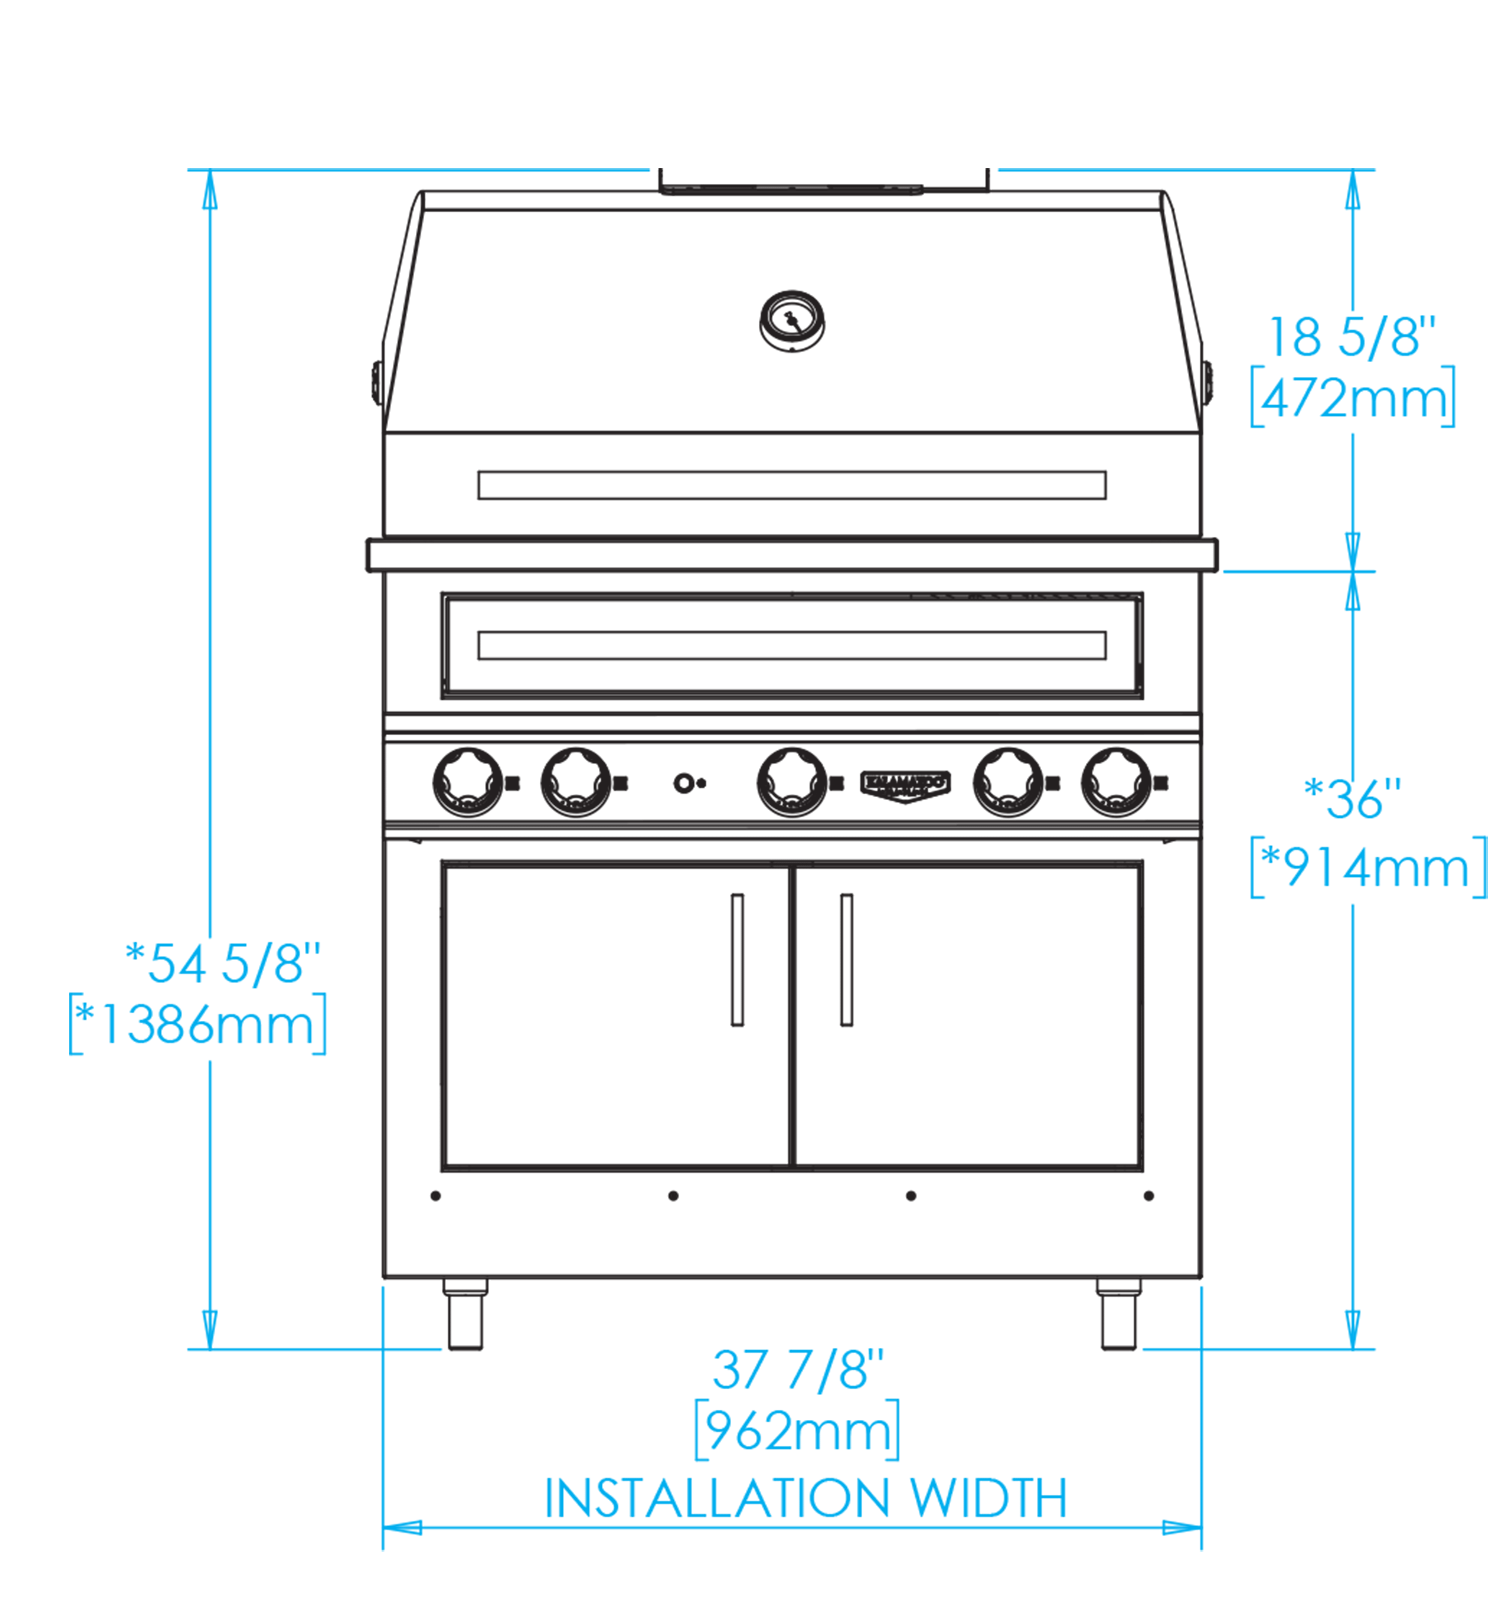 K750HB Built-in Hybrid Fire Grill Dimensions Image